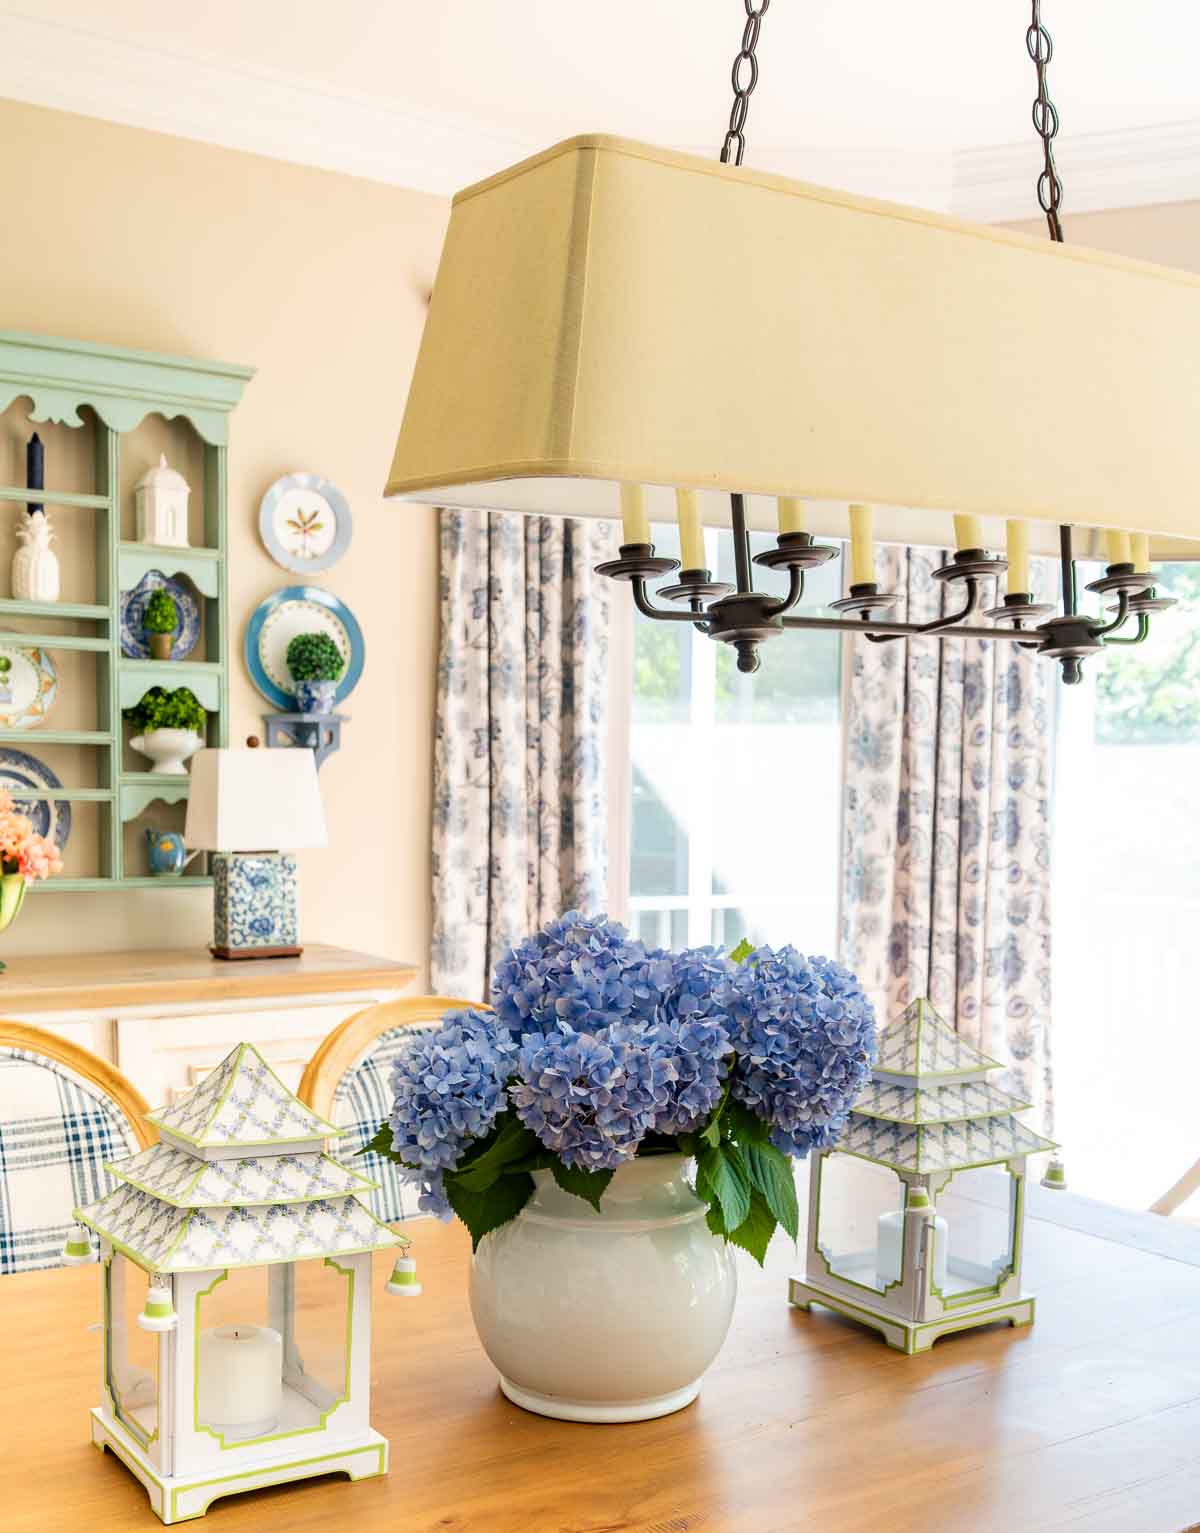 blue hydrangeas in a white vase flanked by pagoda style lanterns on a wood dining table